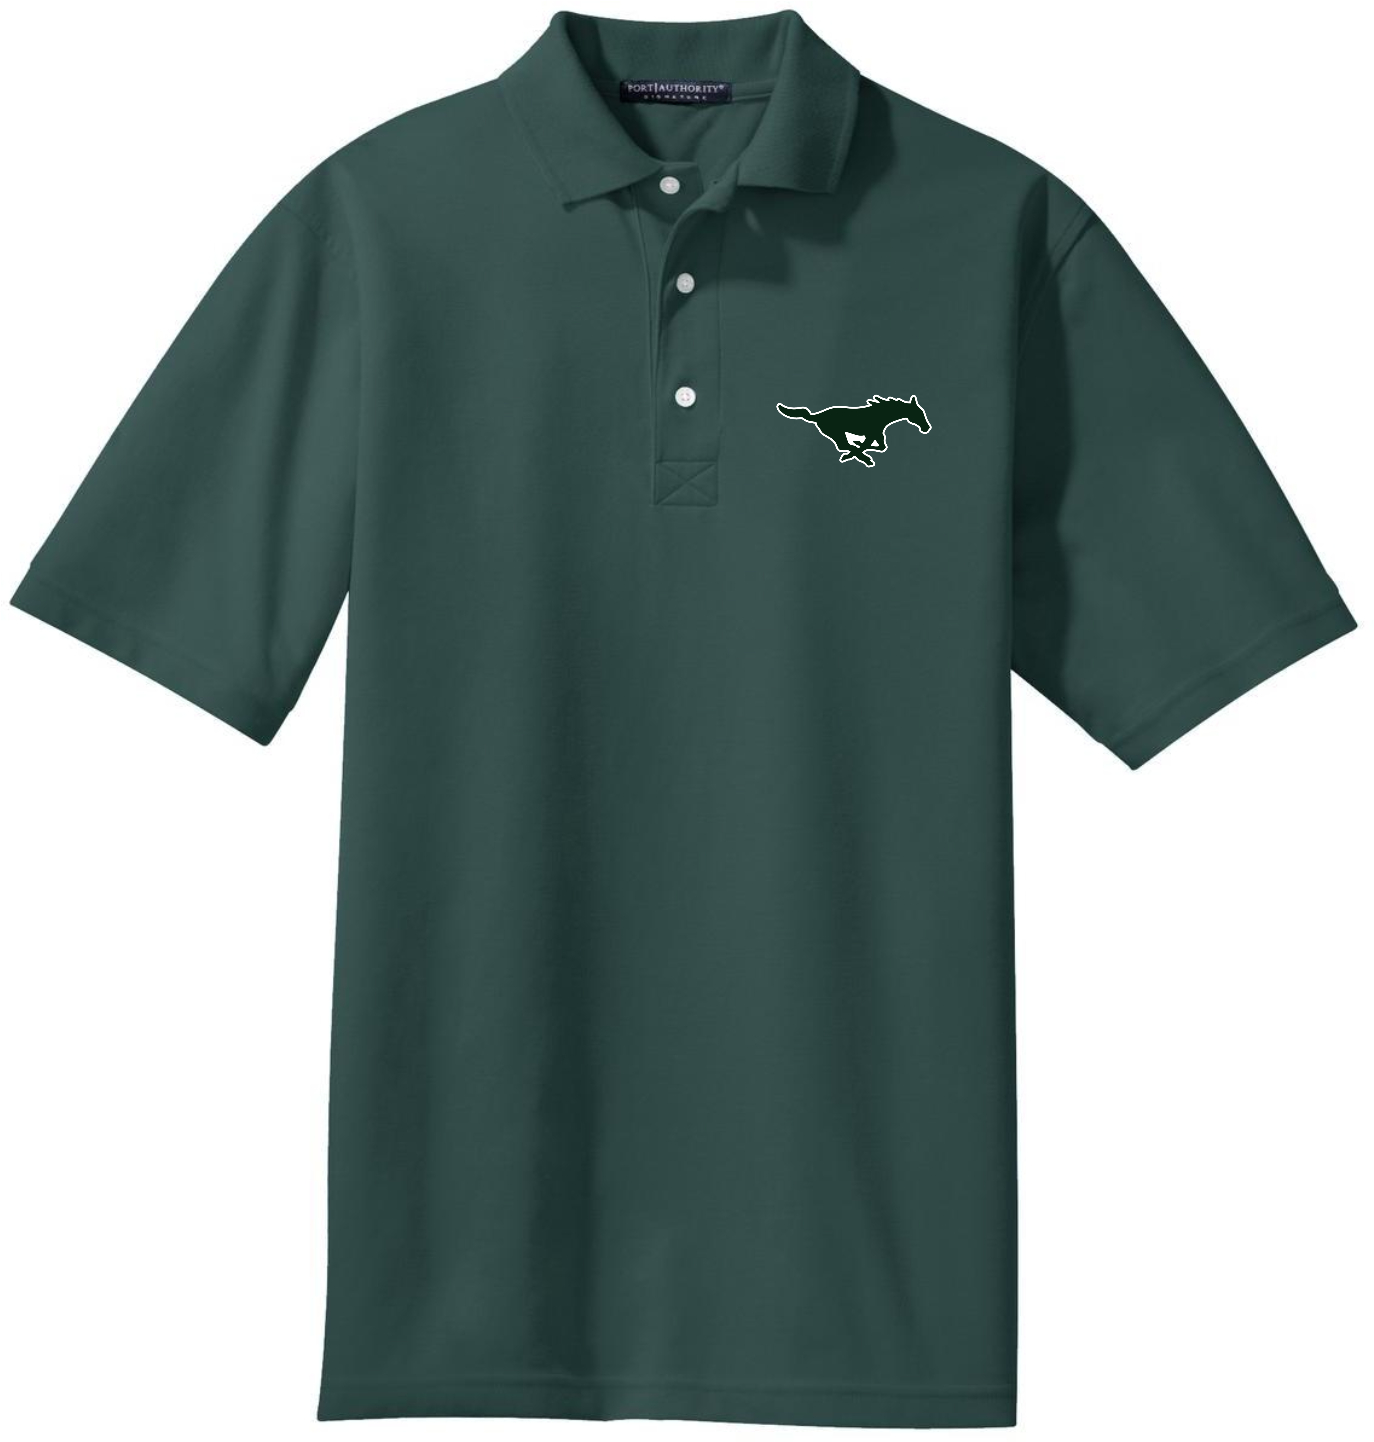 West Perry Standard Polo 